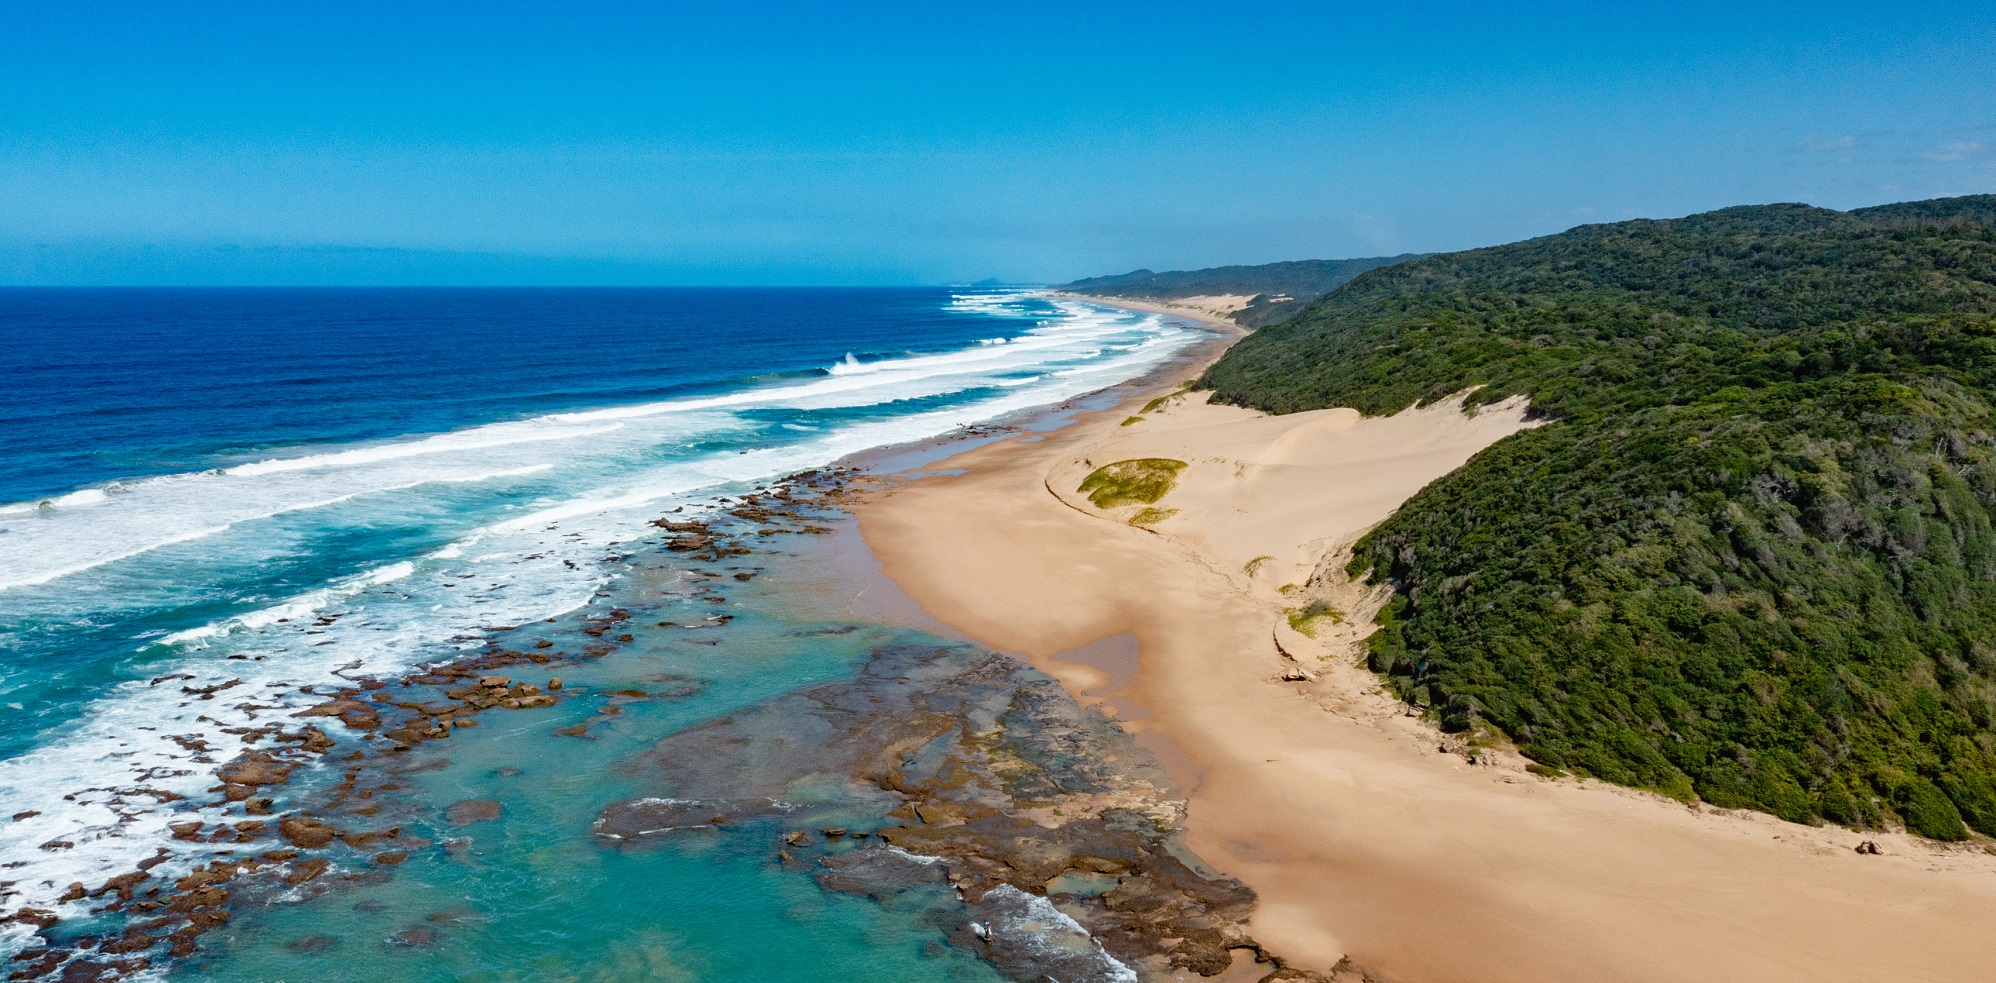 Discover extraordinary natural scenery like this coast on the iSimangaliso Wetland Park when you take a tailor-made trip with Alfred&